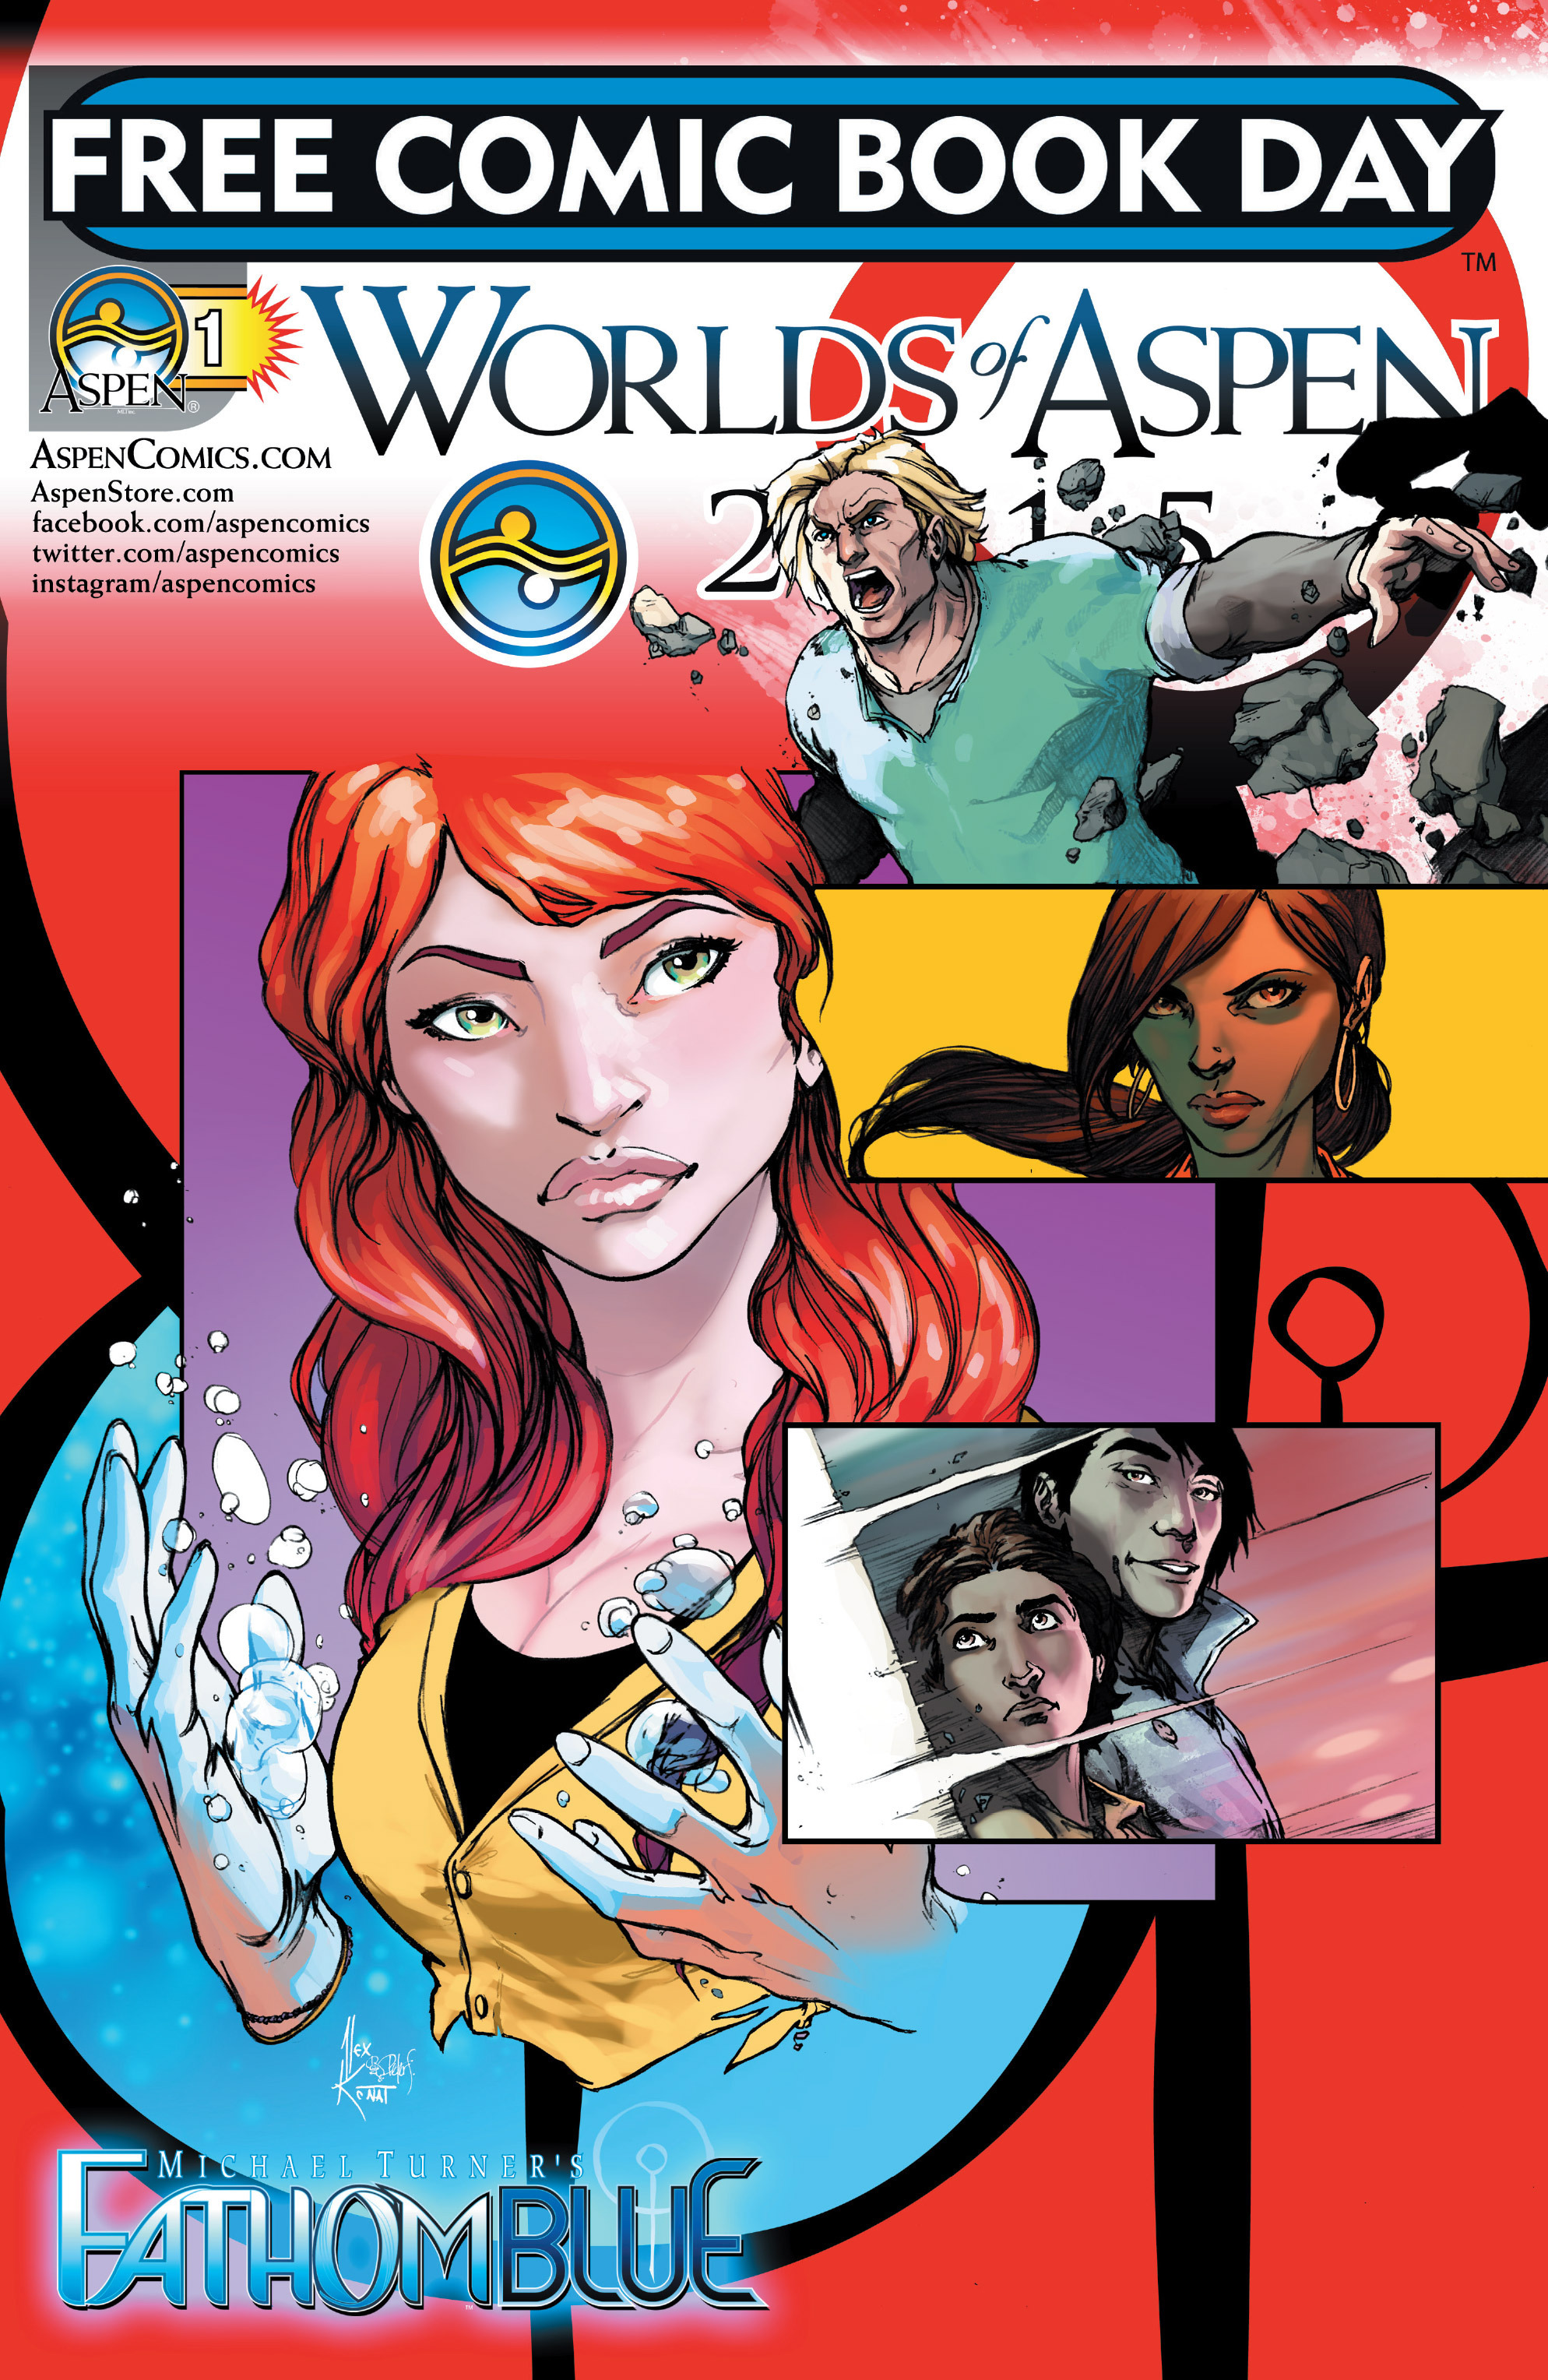 Read online Free Comic Book Day 2015 comic -  Issue # Worlds of Aspen - 18